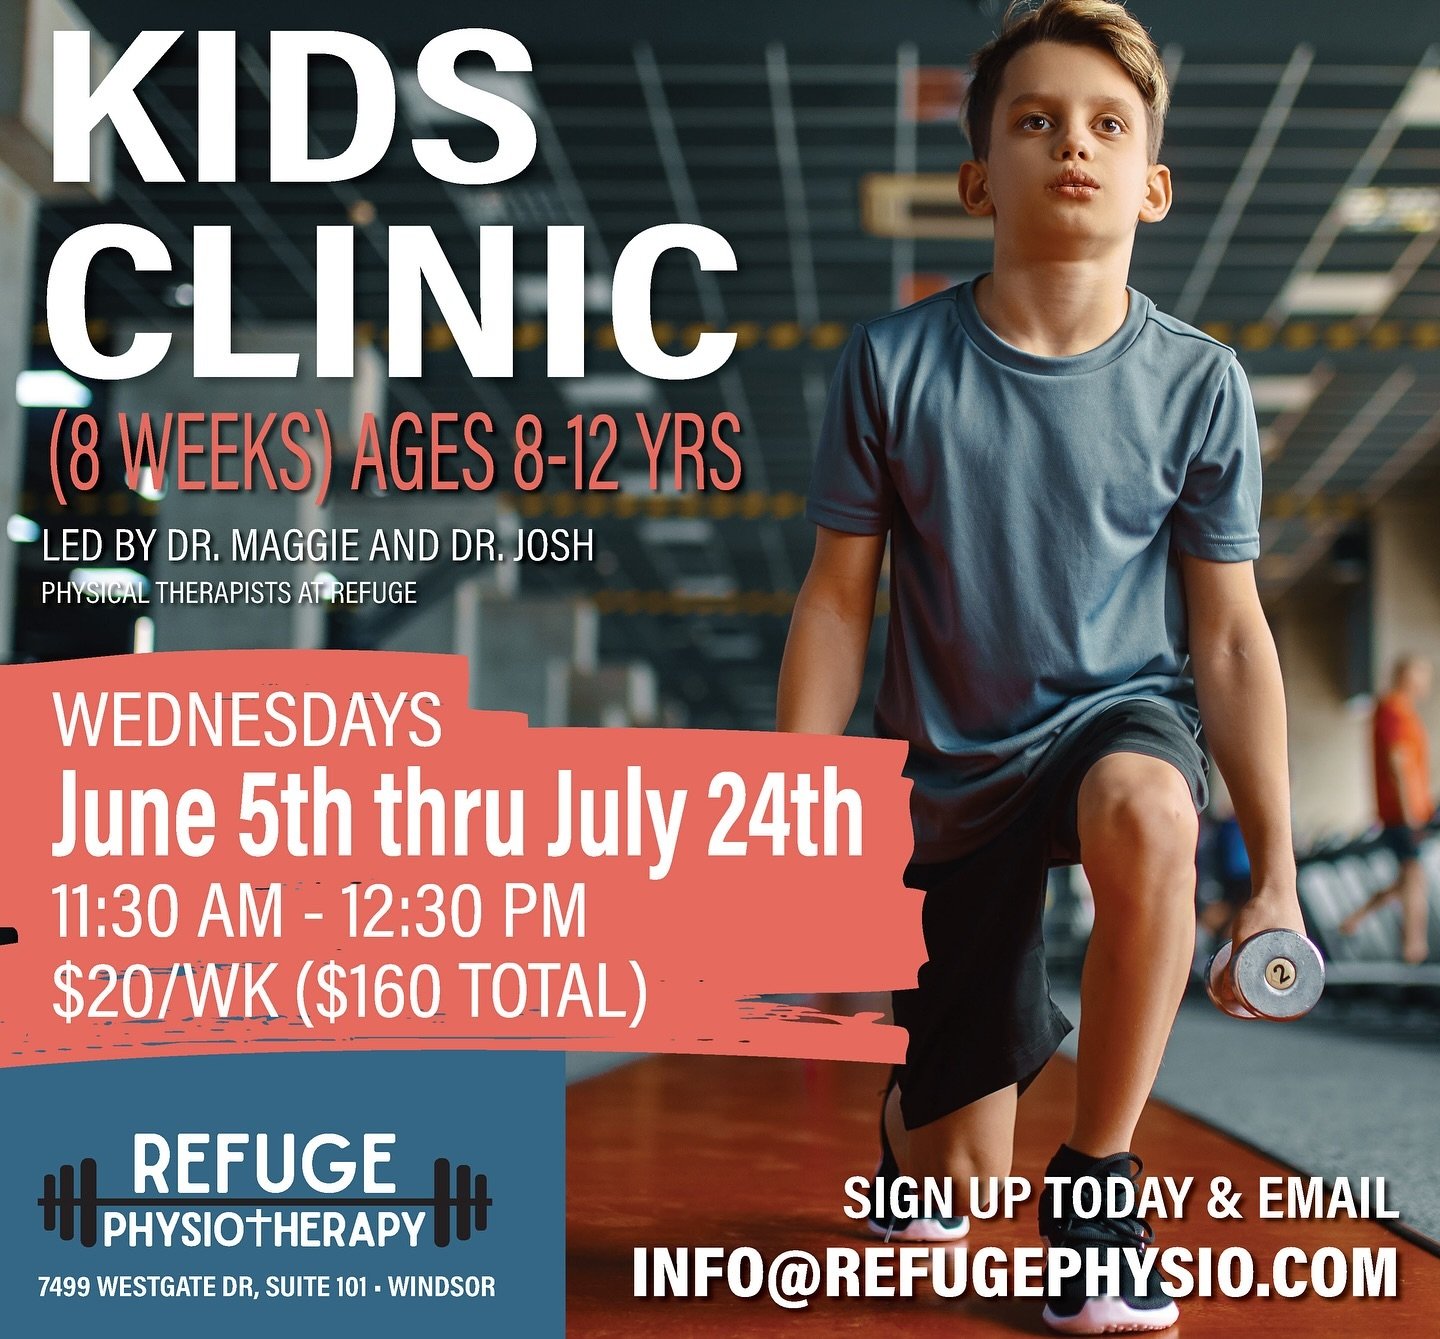 We are so excited to be promoting our annual kids clinic!! It&rsquo;s almost that time!

Limited spots available! Please sign your kids up if you want them to move and get stronger and more aware of their bodies! Get the kids off the iPads and get th